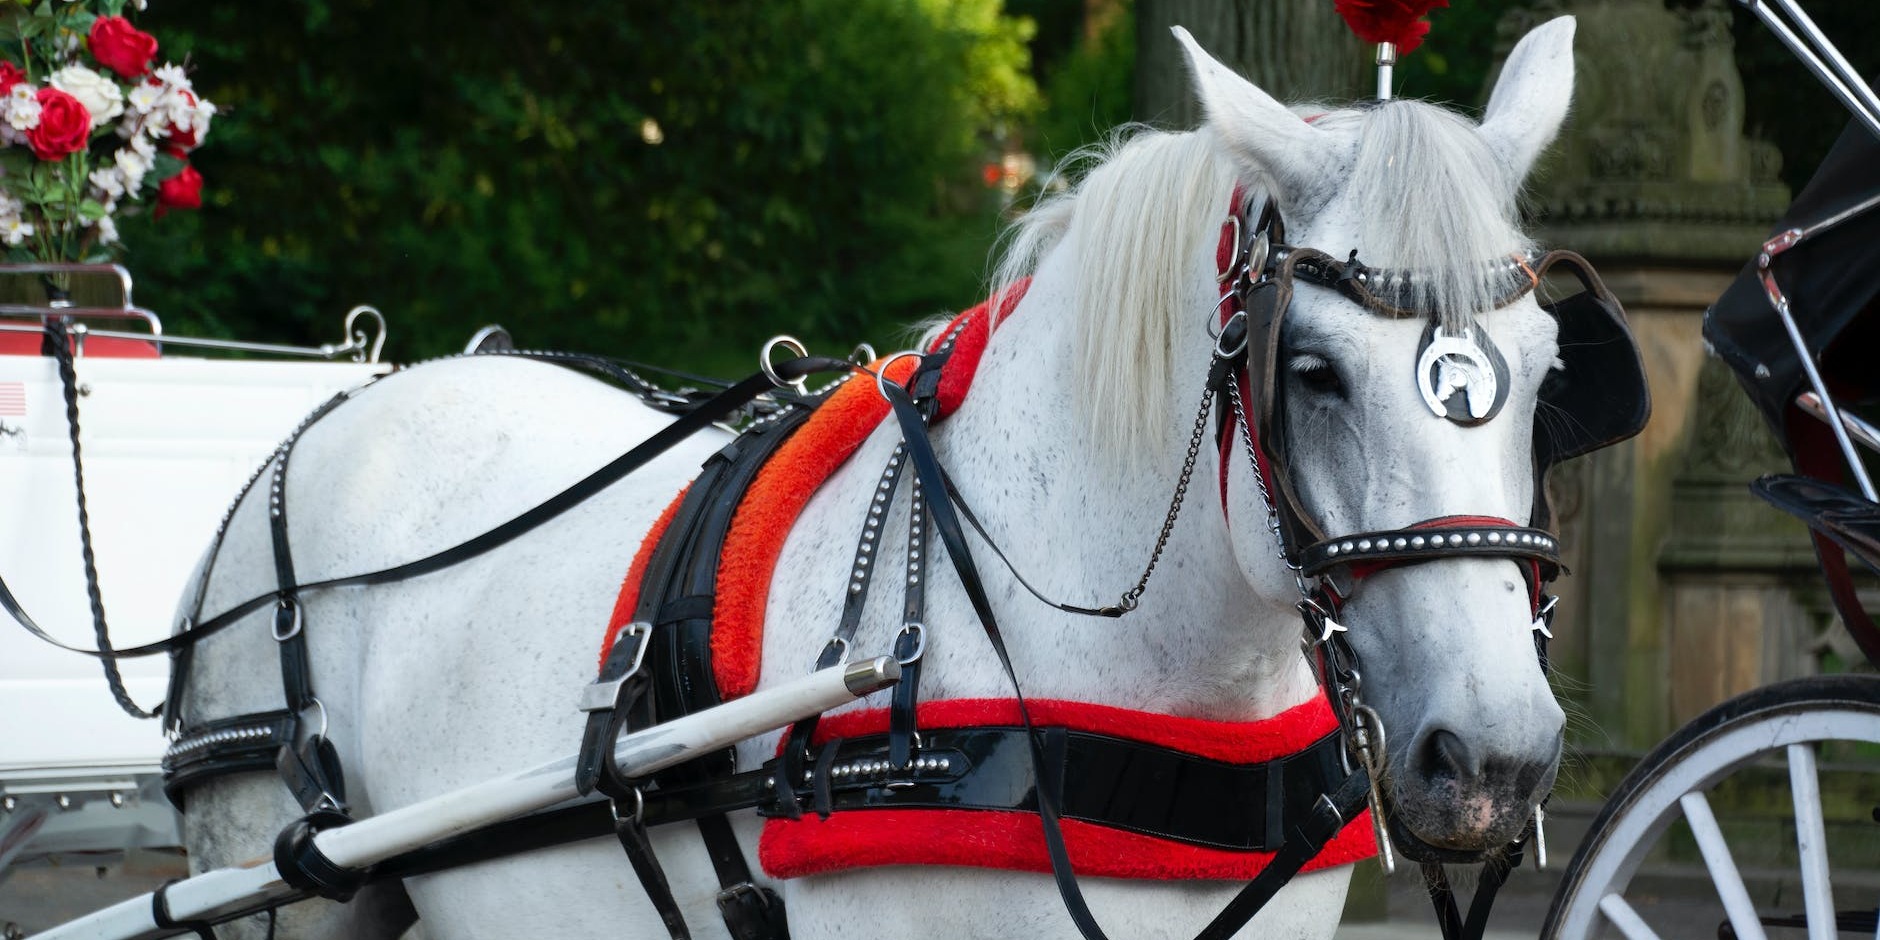 The Essential Guide to Hiring a Horse and Carriage for UK Special Events